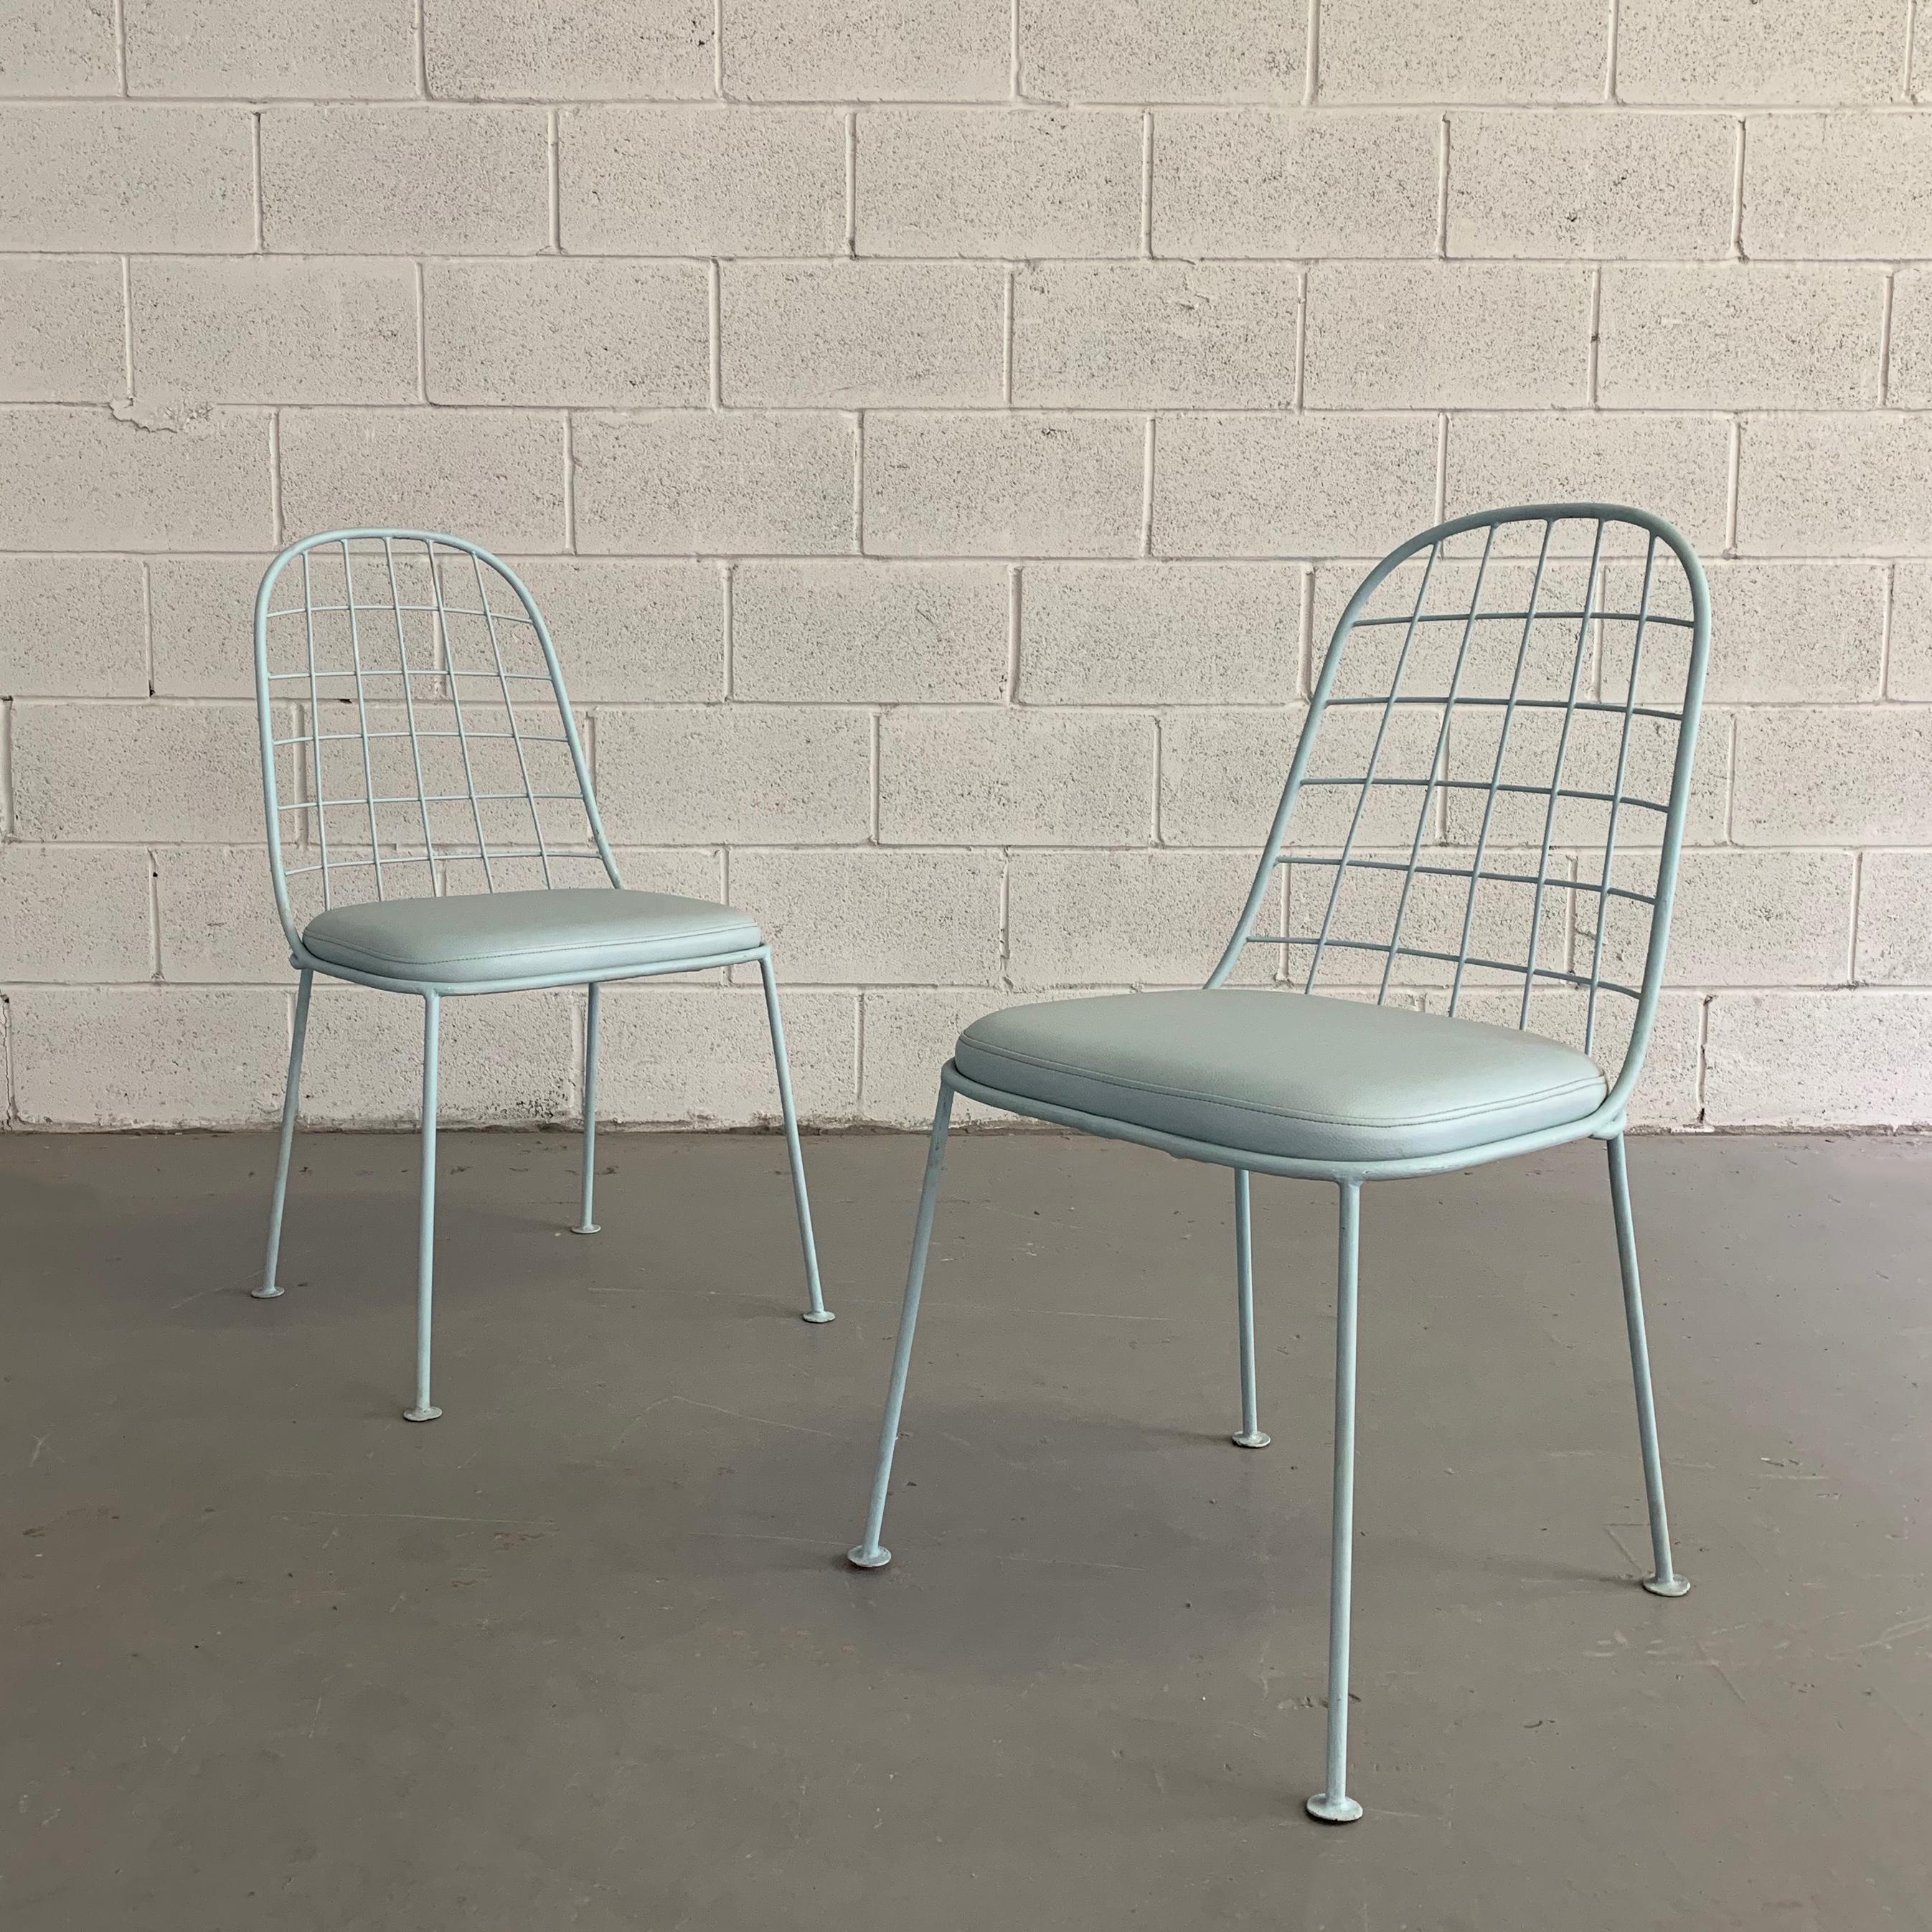 American Pair of Mid-Century Modern Painted Wrought Iron Outdoor Patio Chairs For Sale